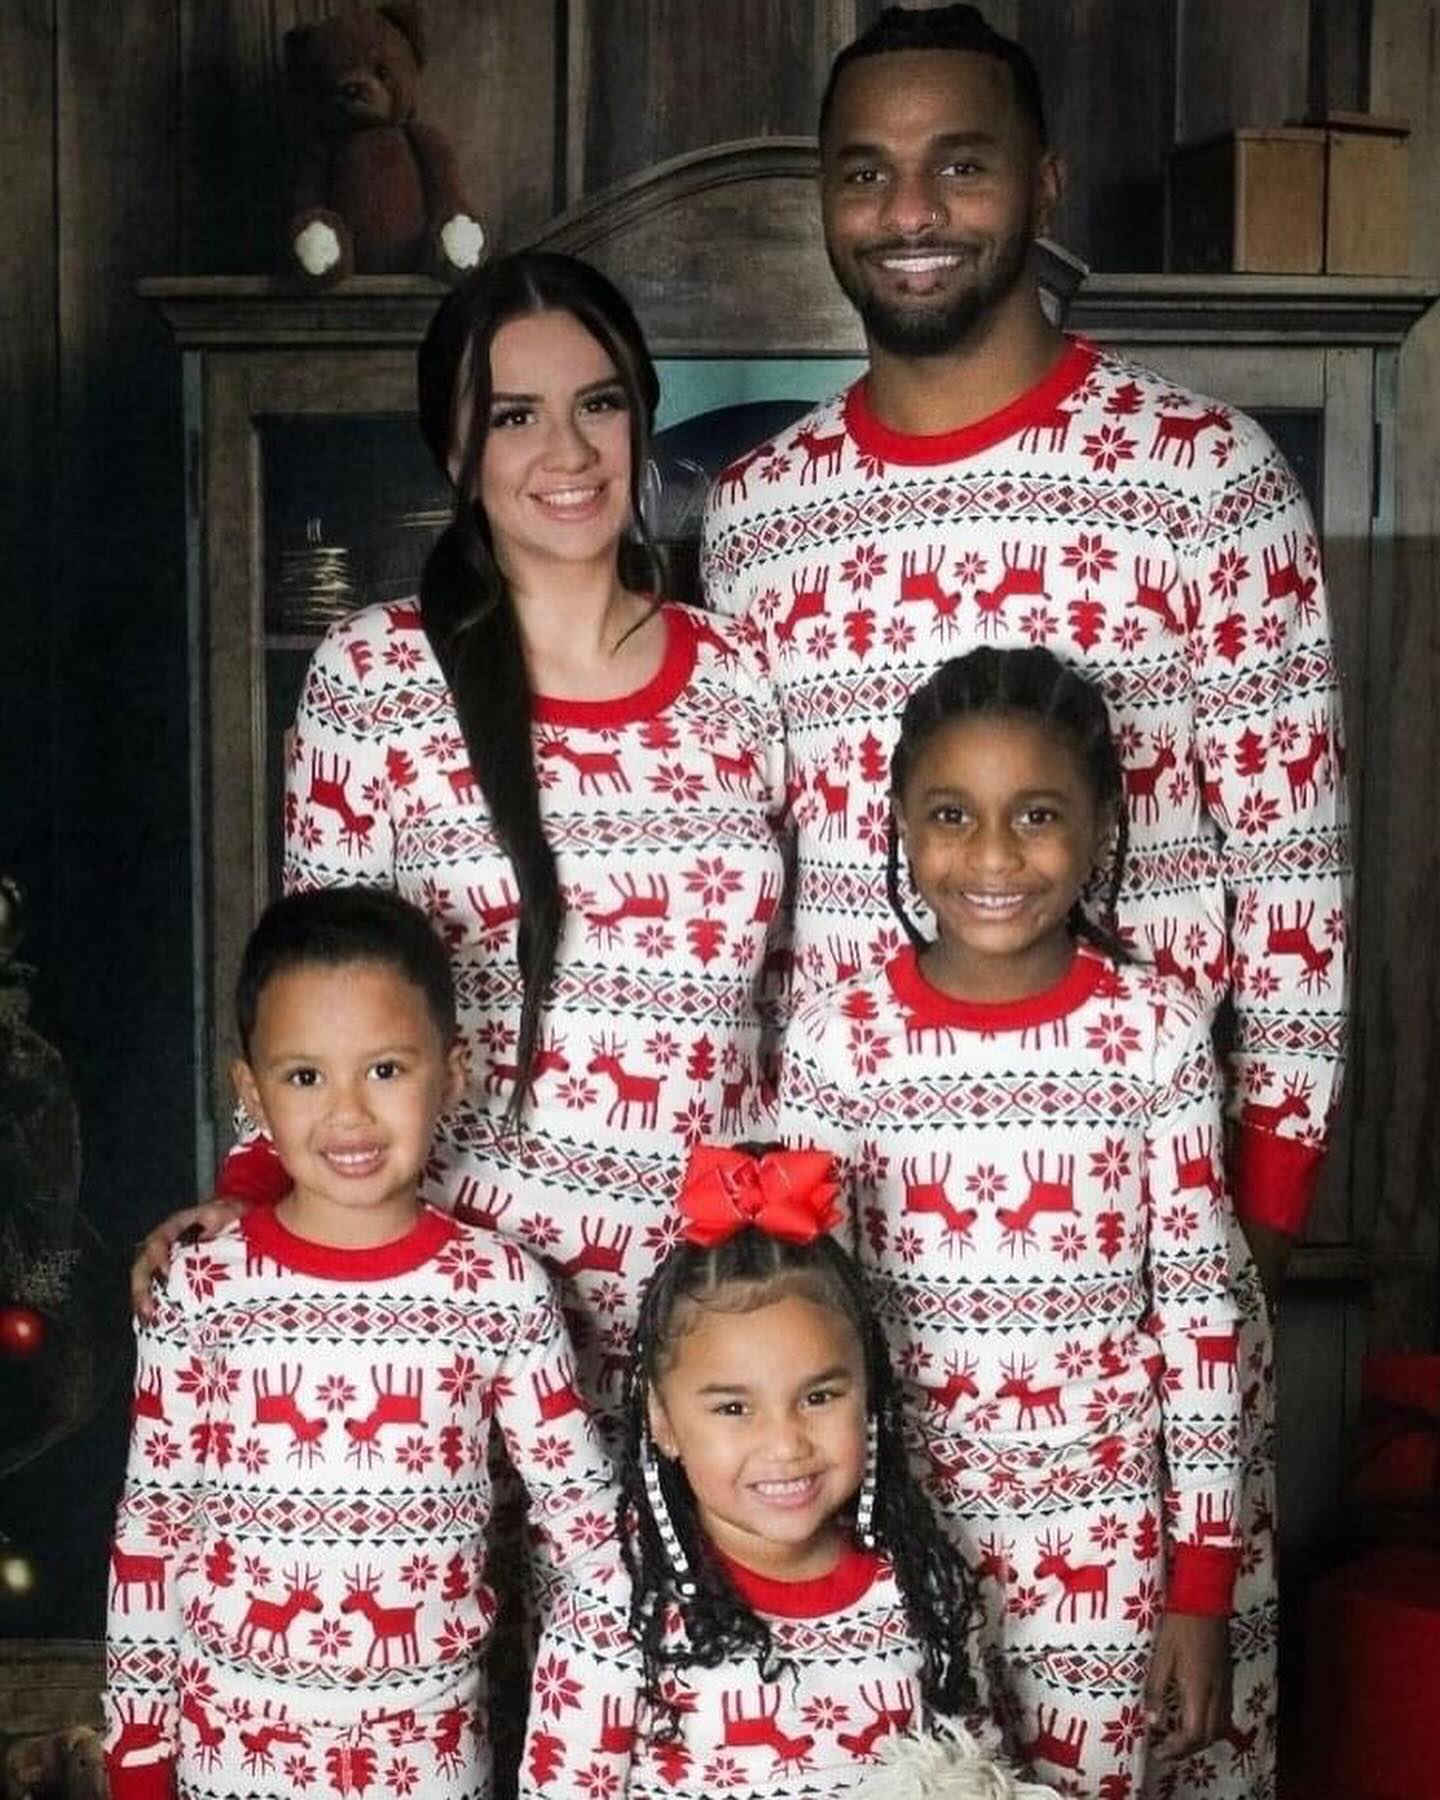 Kayla took a Christmas photo with her children and Ryan Leigh